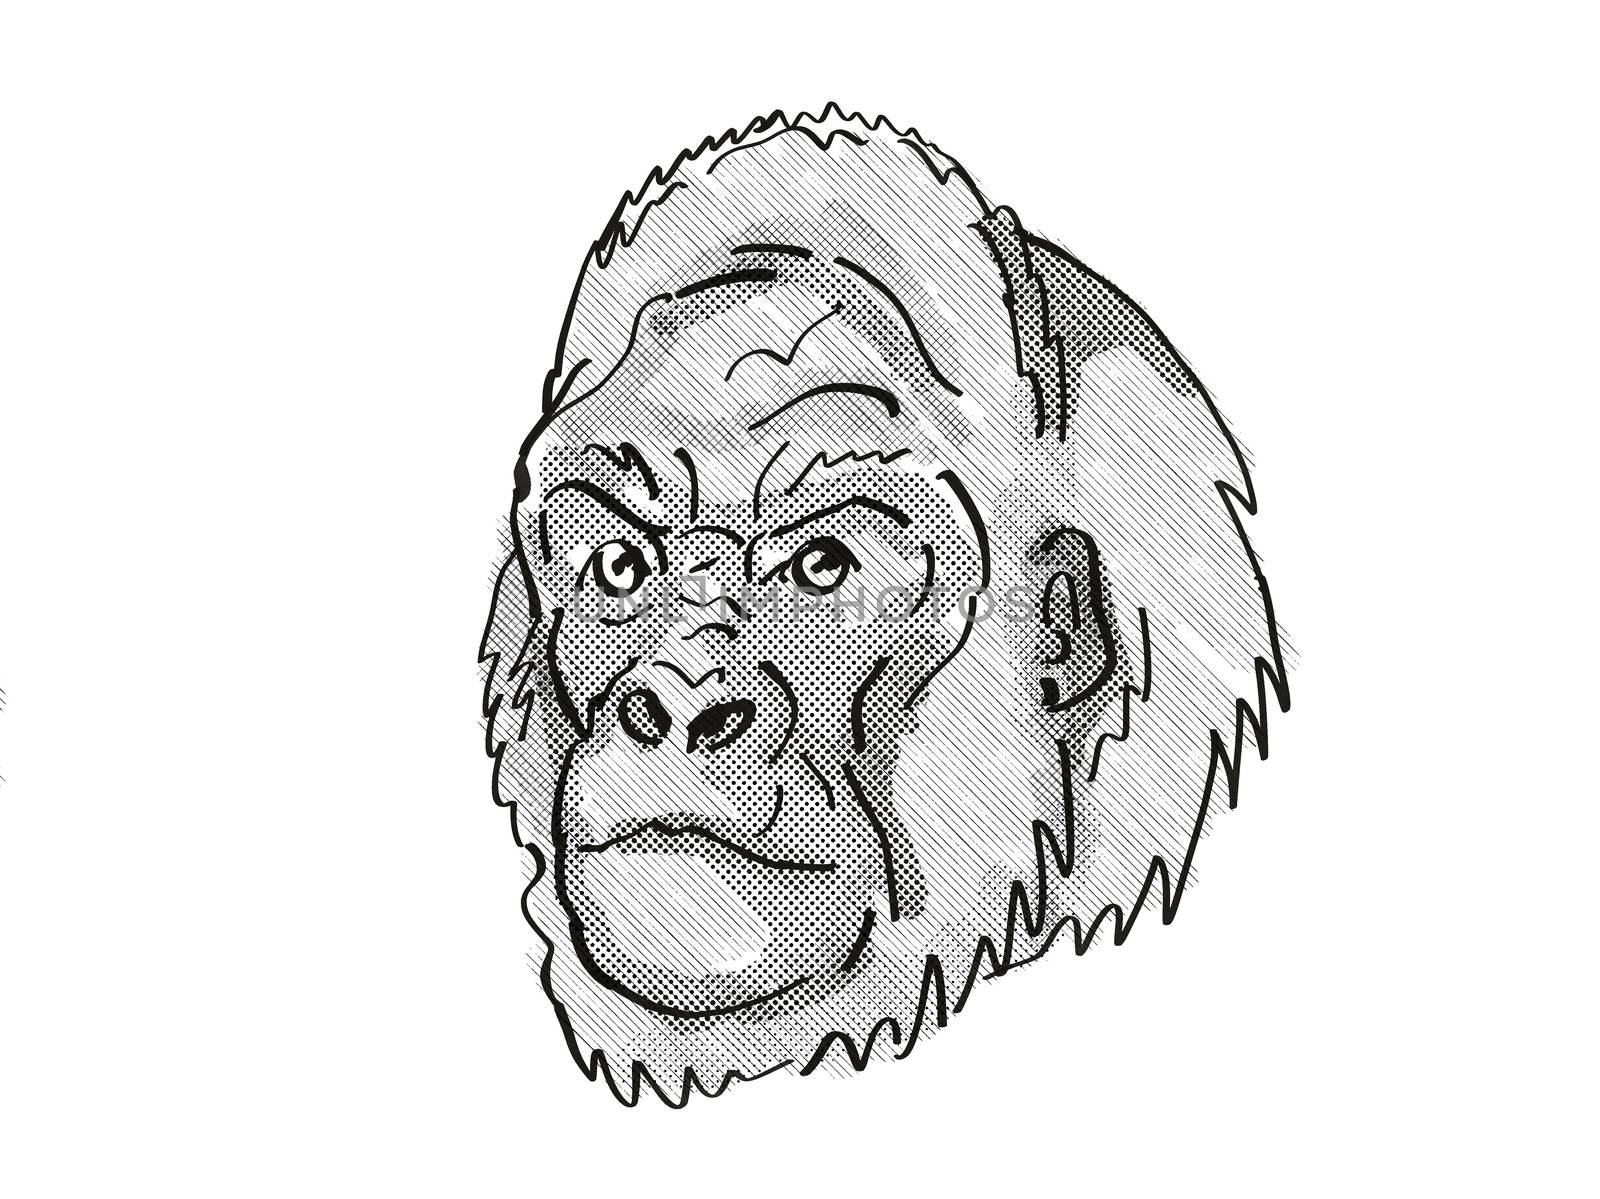 Retro cartoon style drawing of head of a Western Lowland Gorilla, an endangered wildlife species on isolated white background done in black and white.